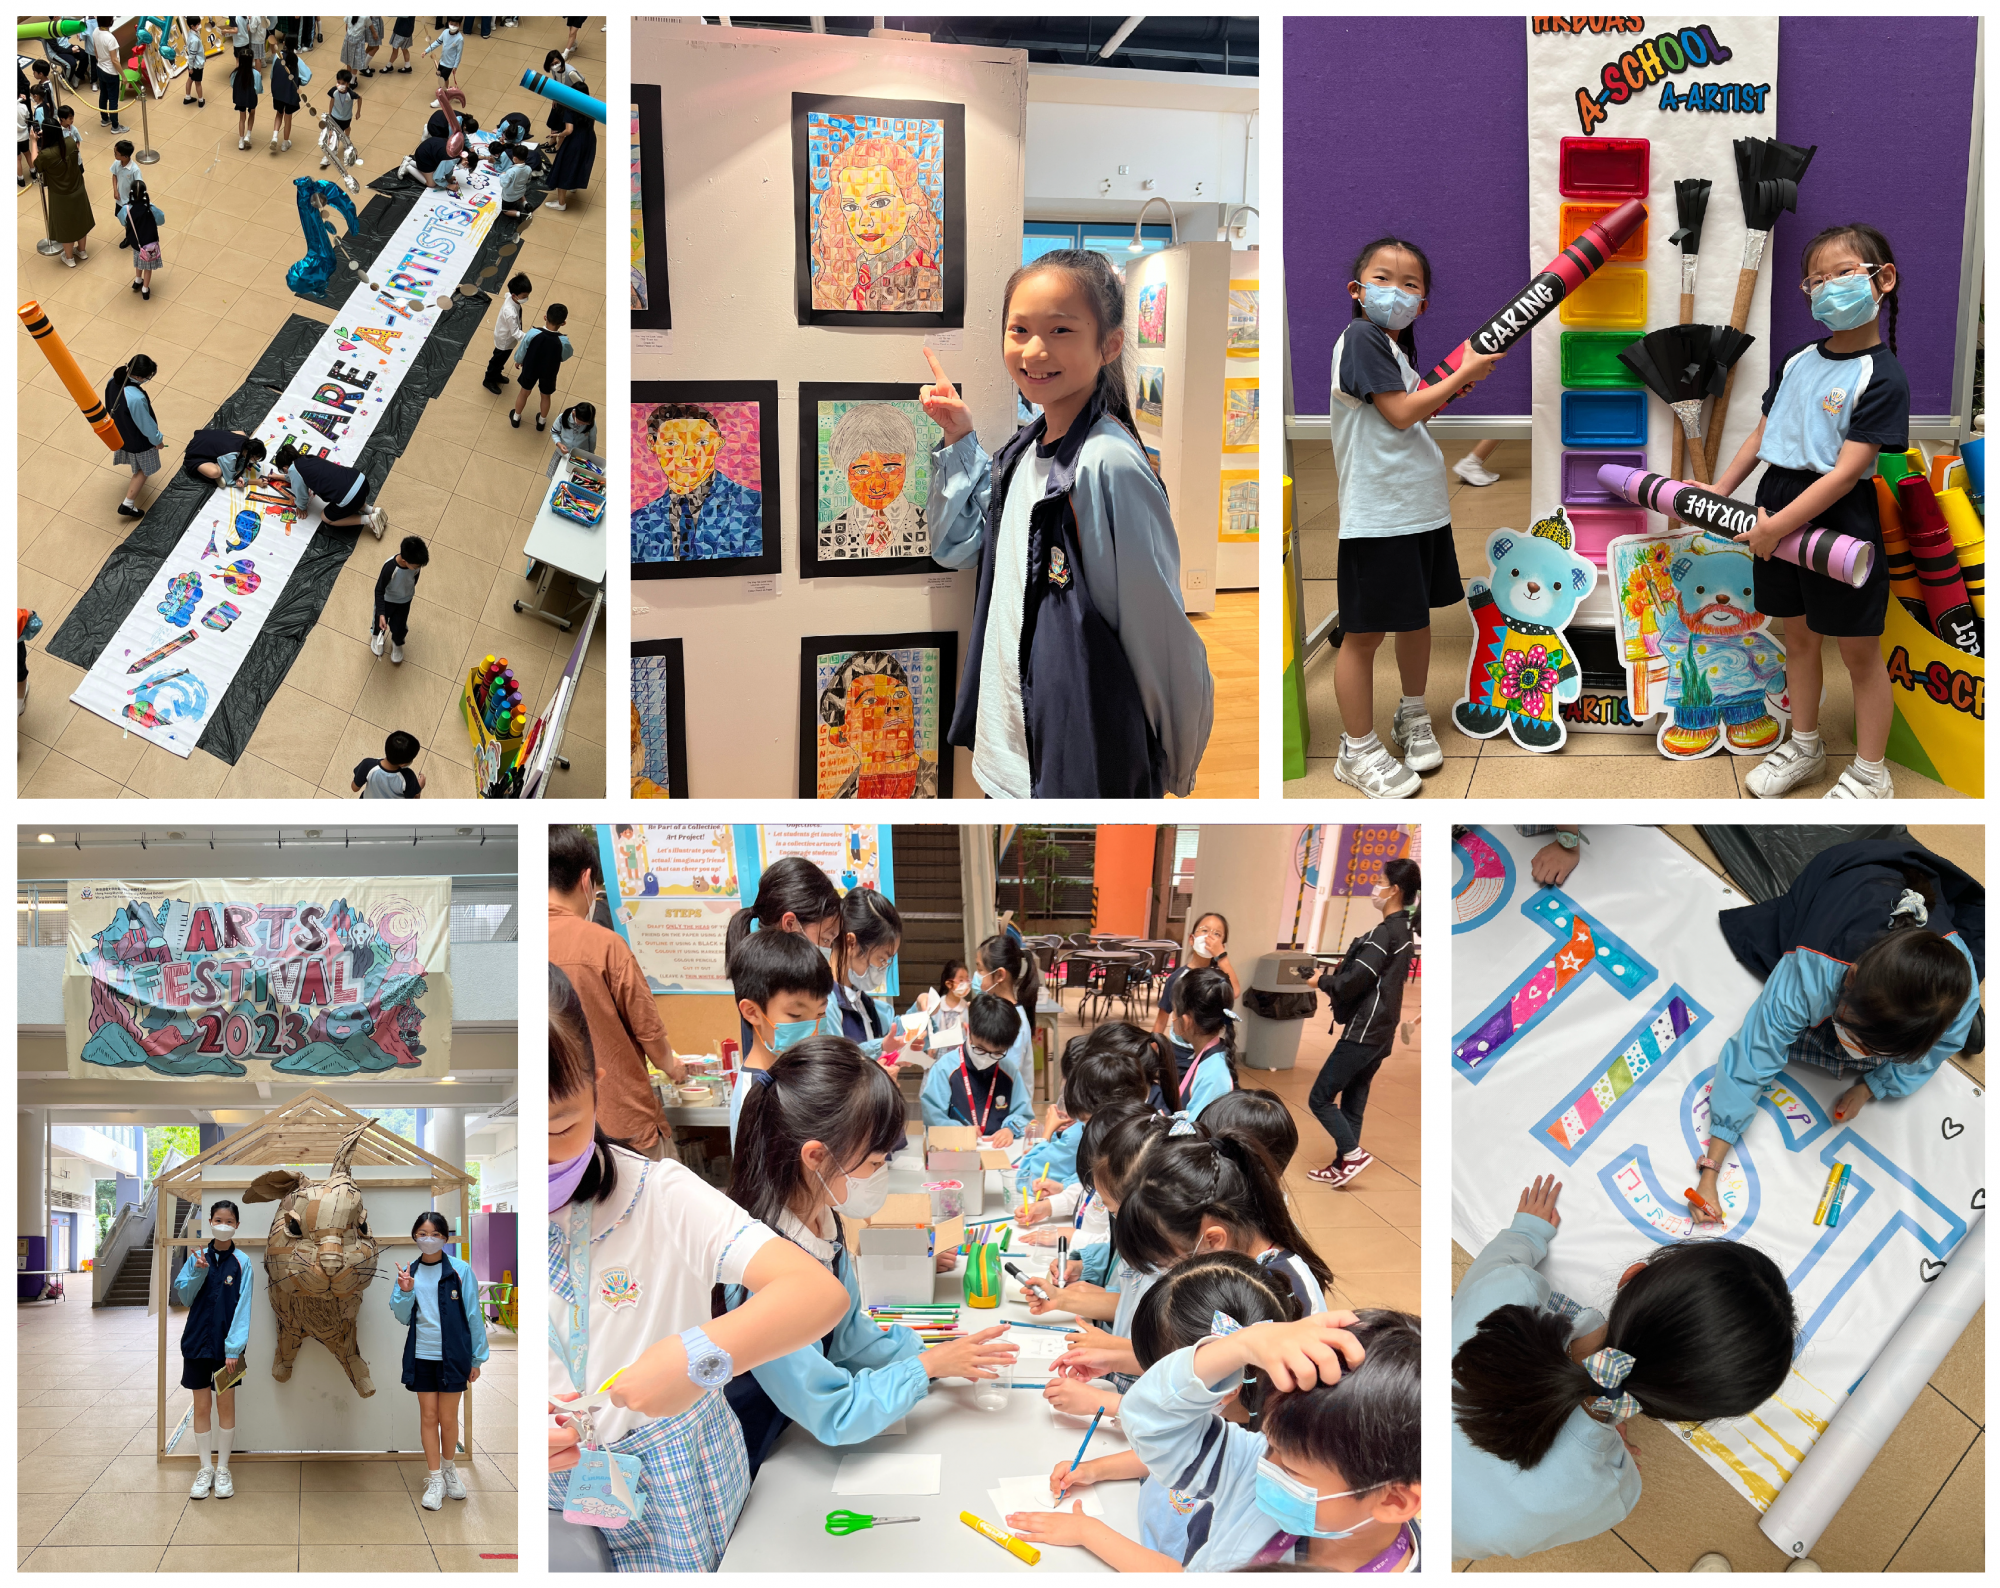 Arts Festival with Middle School Exhibition